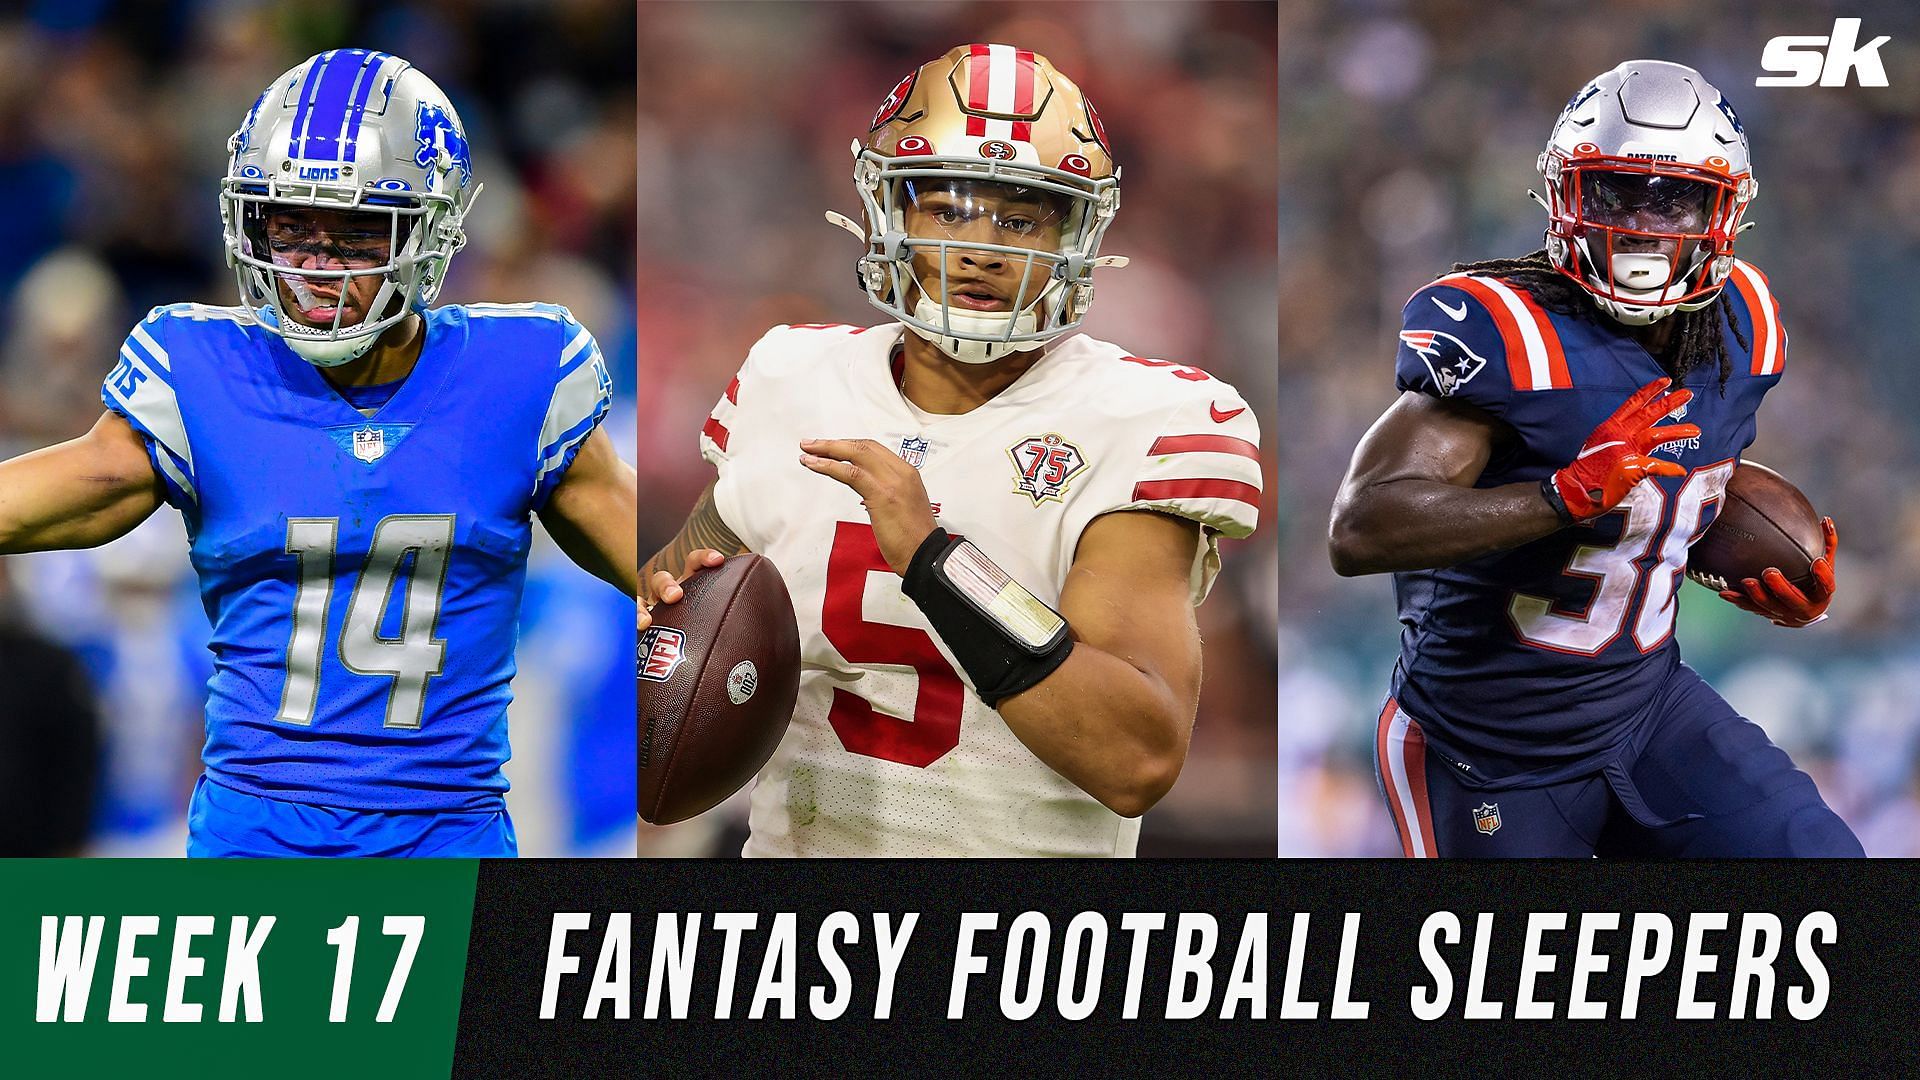 Your fantasy football sleepers for Week 17